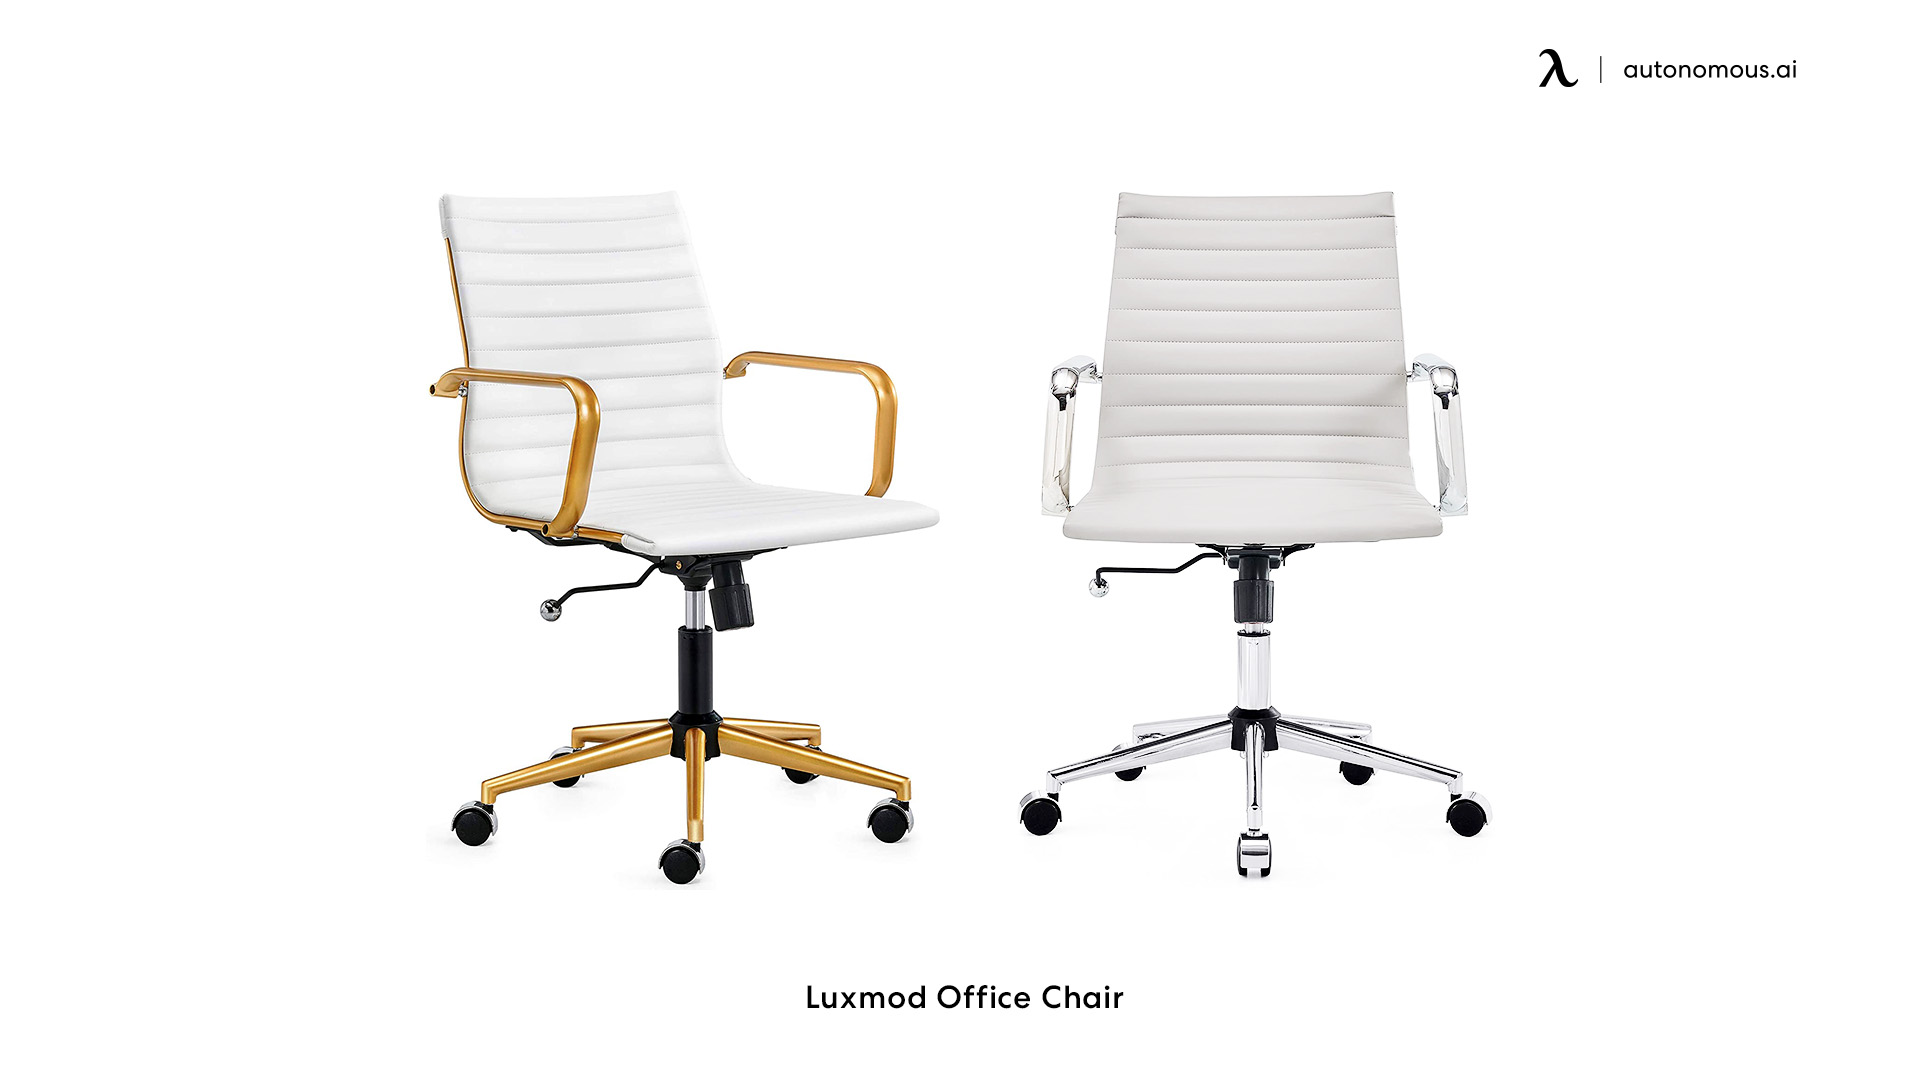 Lux Mod Gold and White Office Chair